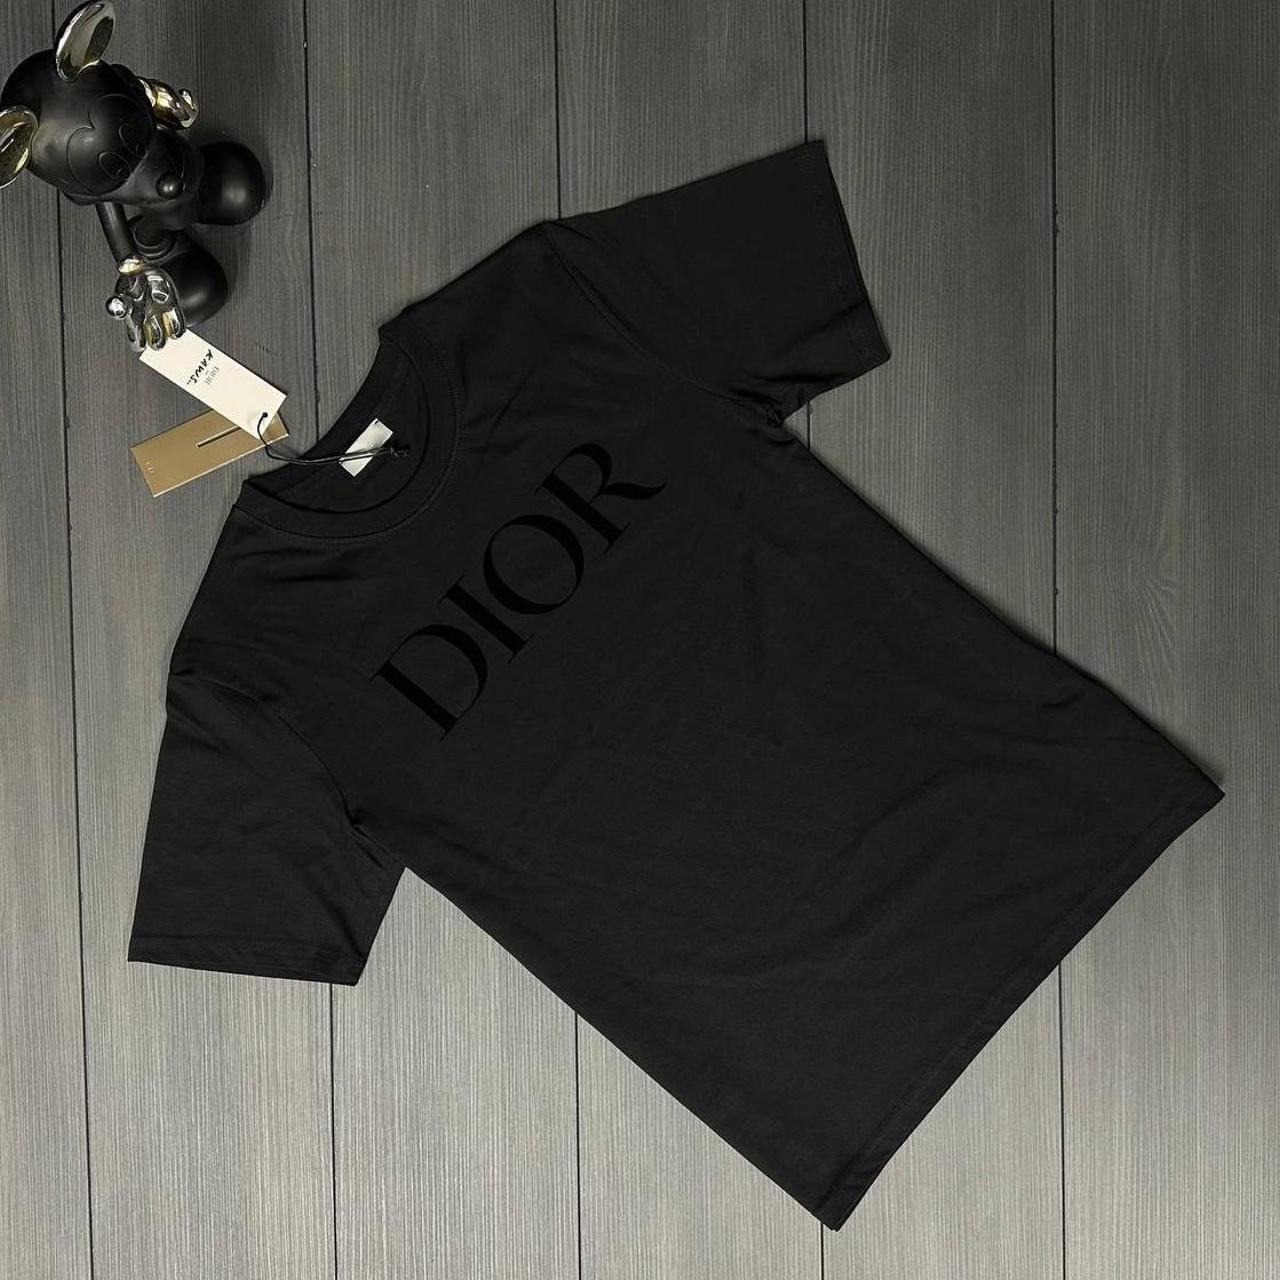 Shop dior shirt for Sale on Shopee Philippines